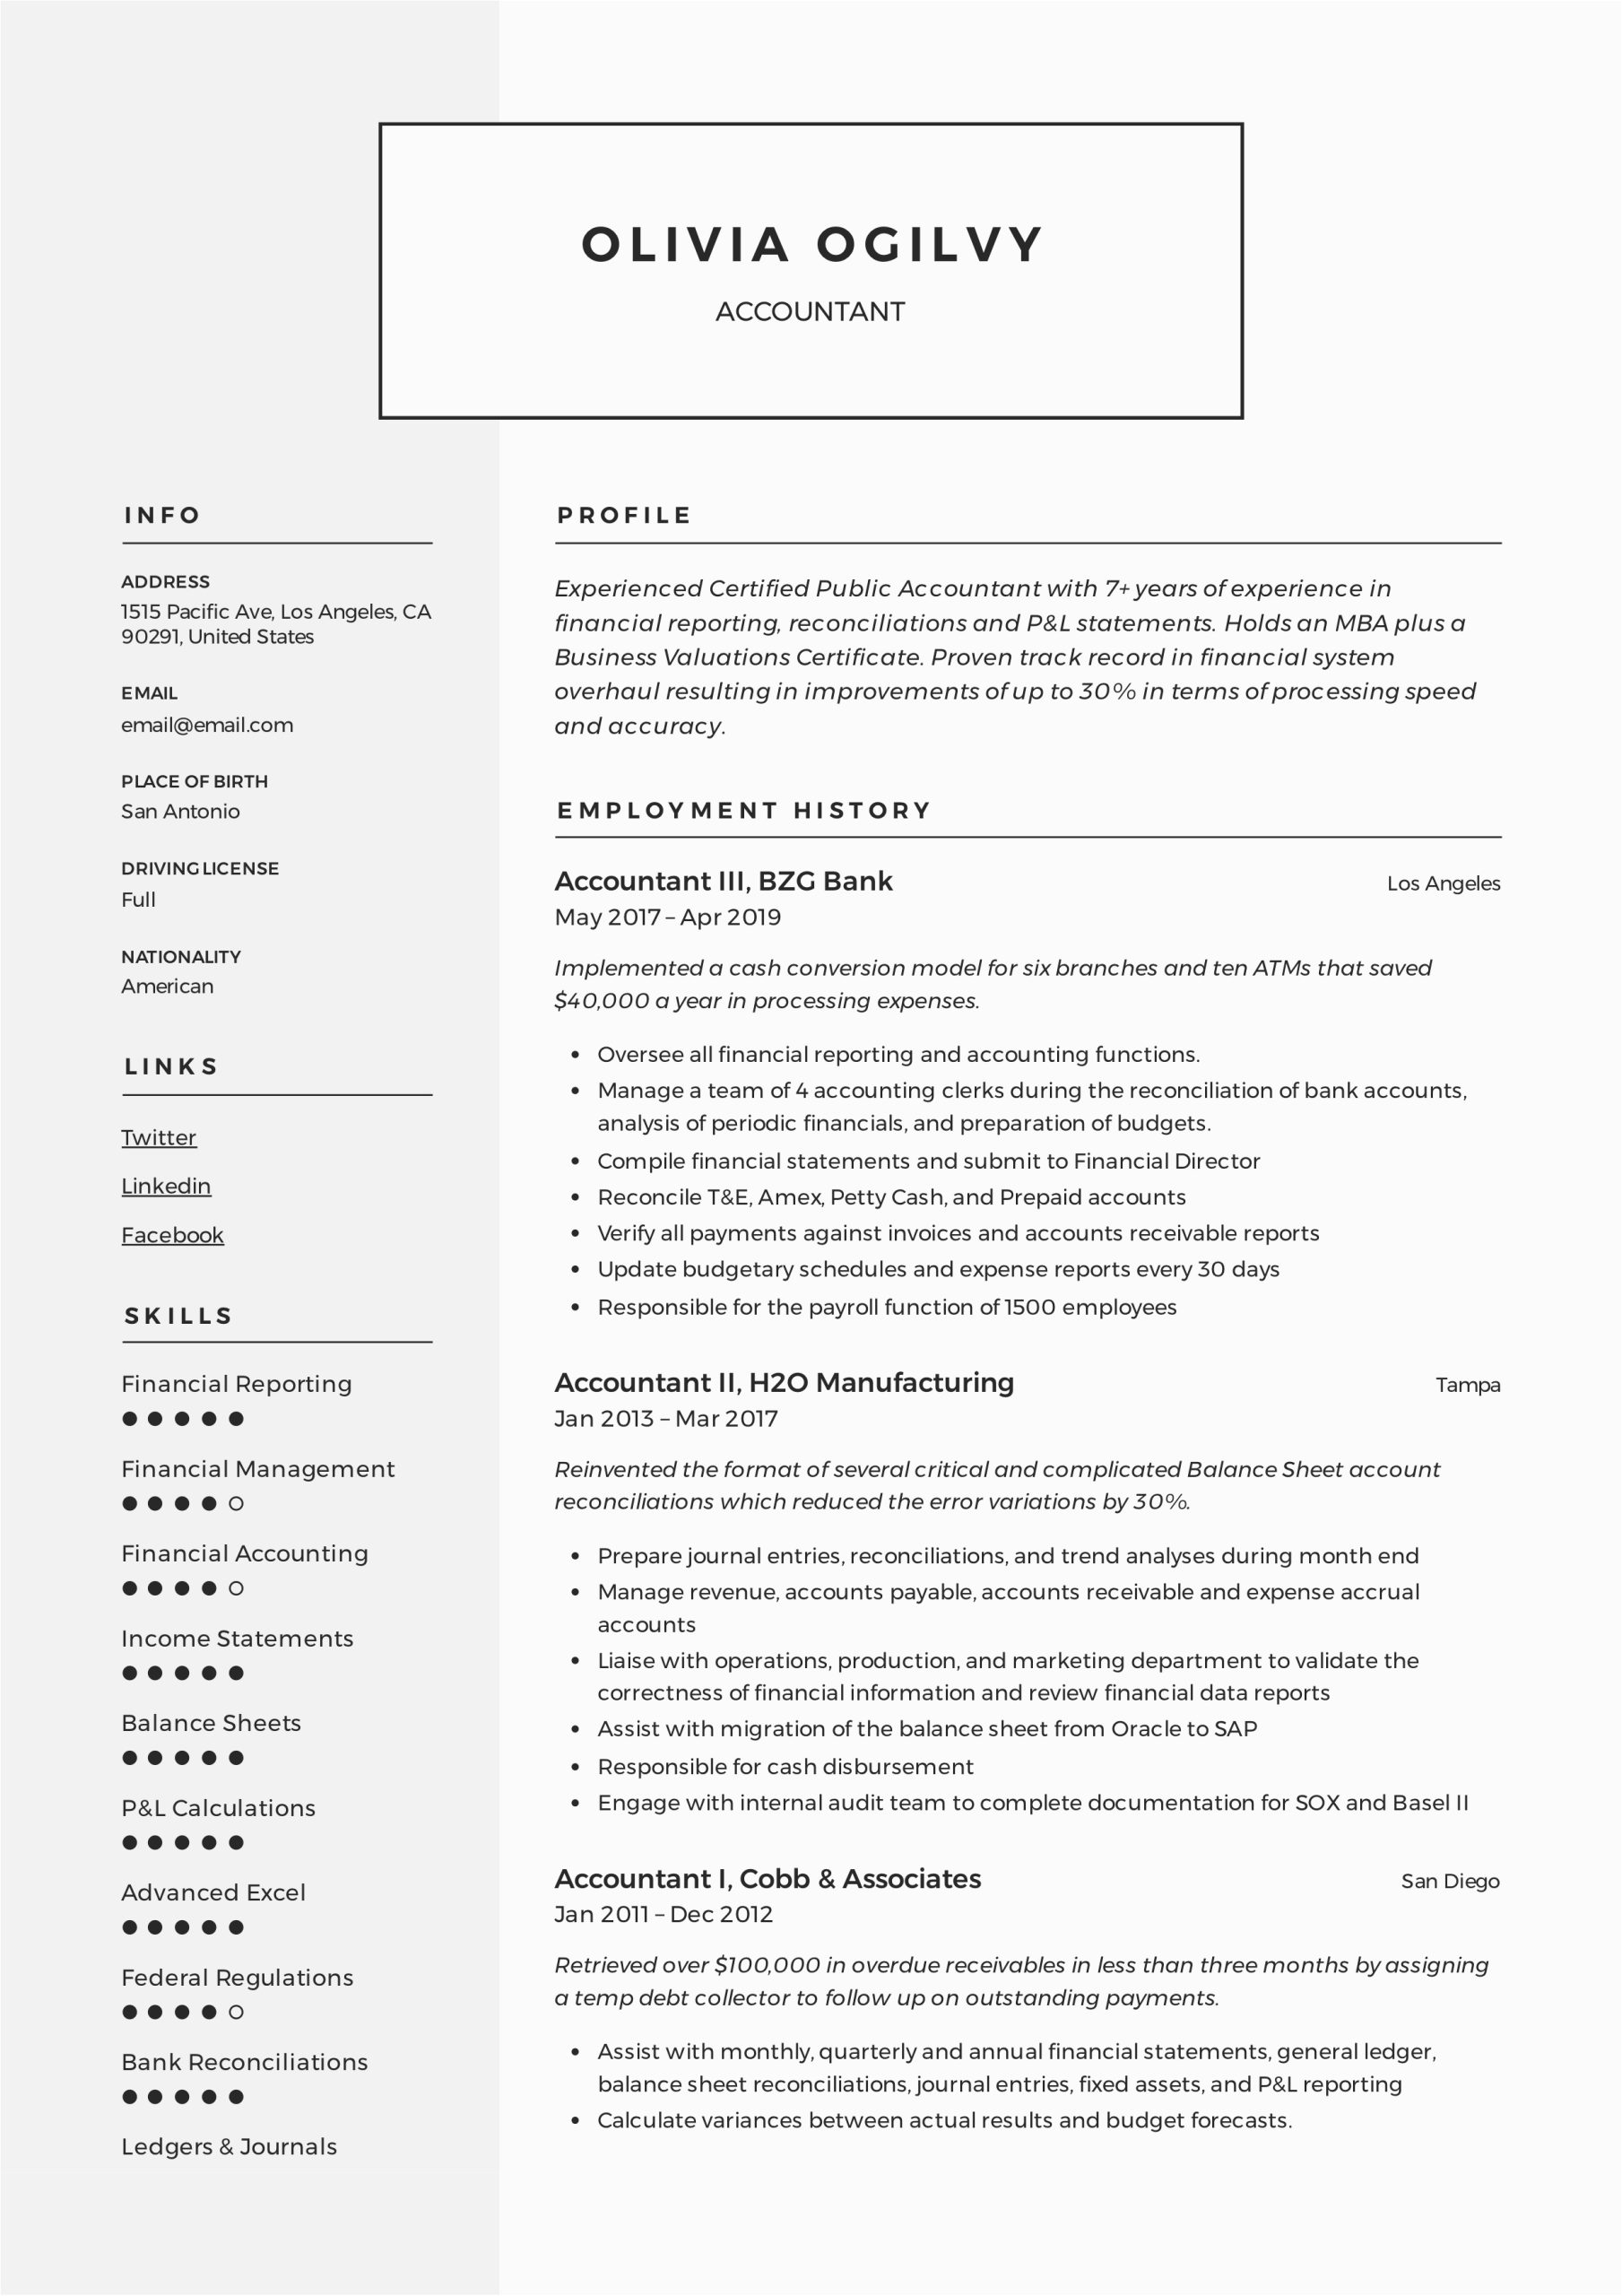 1 Year Experience Resume Sample for Accountant Accountant Resume & Writing Guide 12 Resume Templates